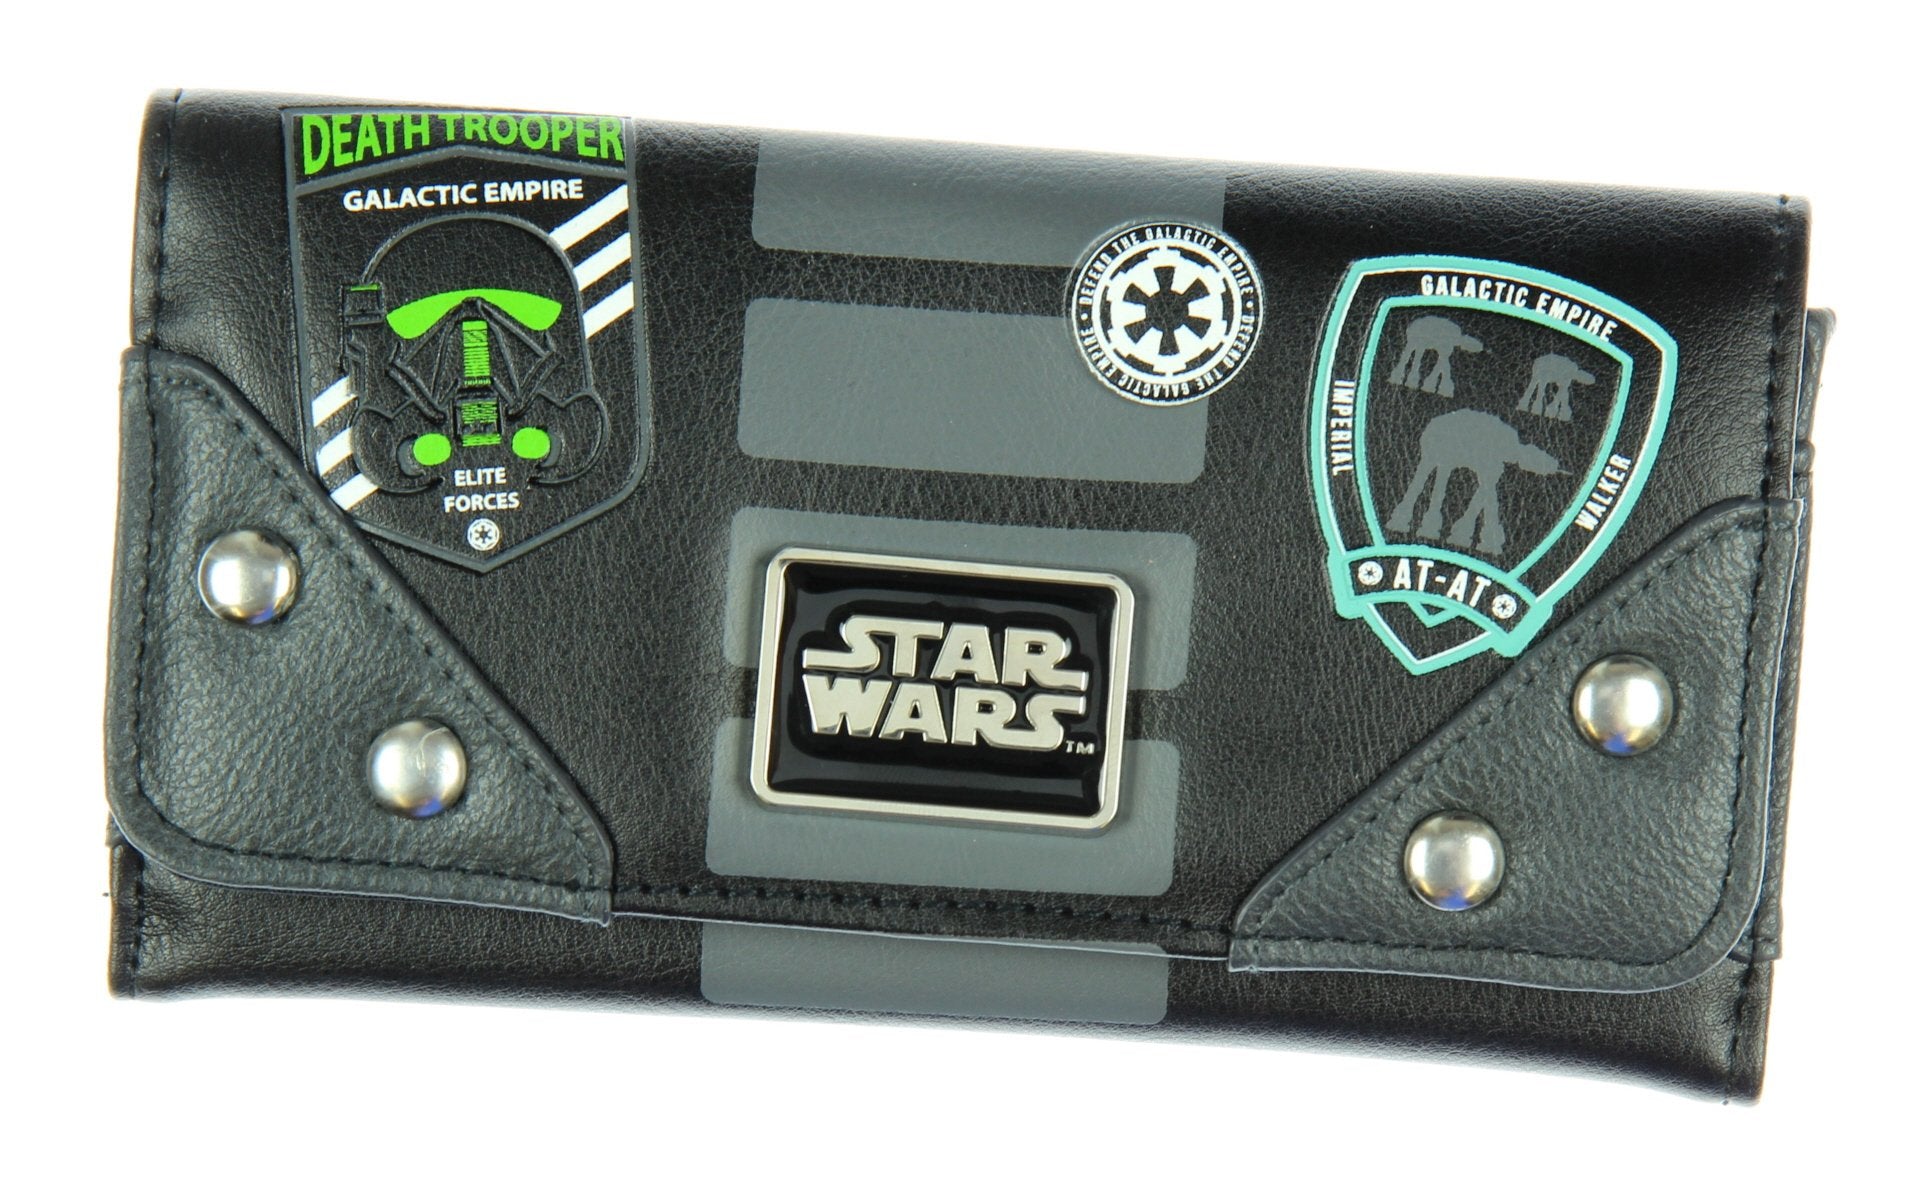 Front view of Star Wars Rogue One Empire-themed flap wallet featuring Galactic Empire and Death Trooper design.